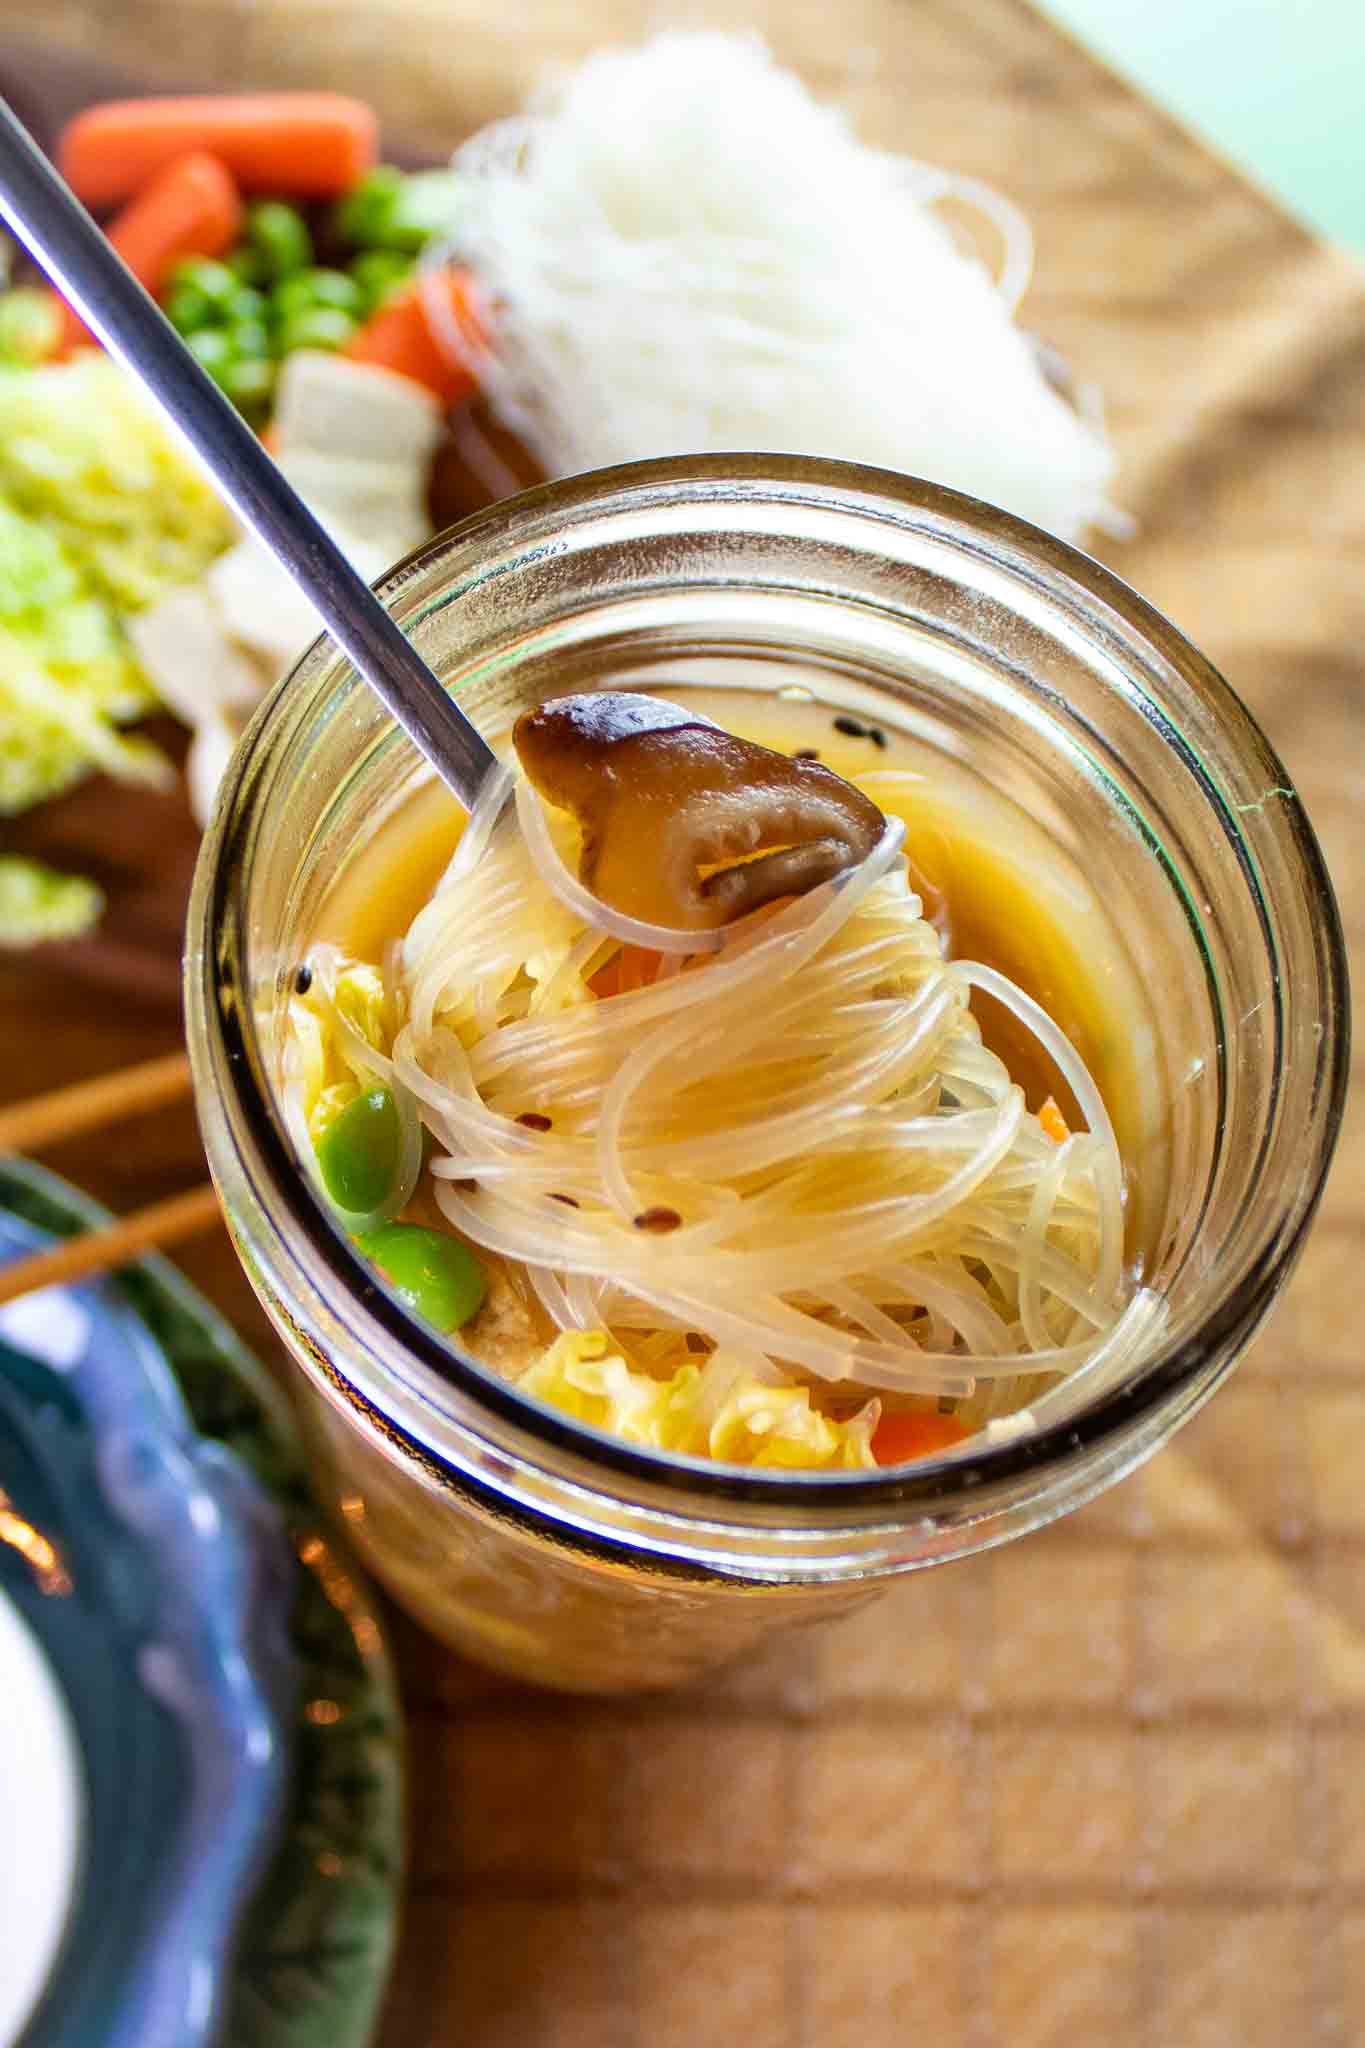 mason jar filled with asian noodle soup and vegetables with a spoon.